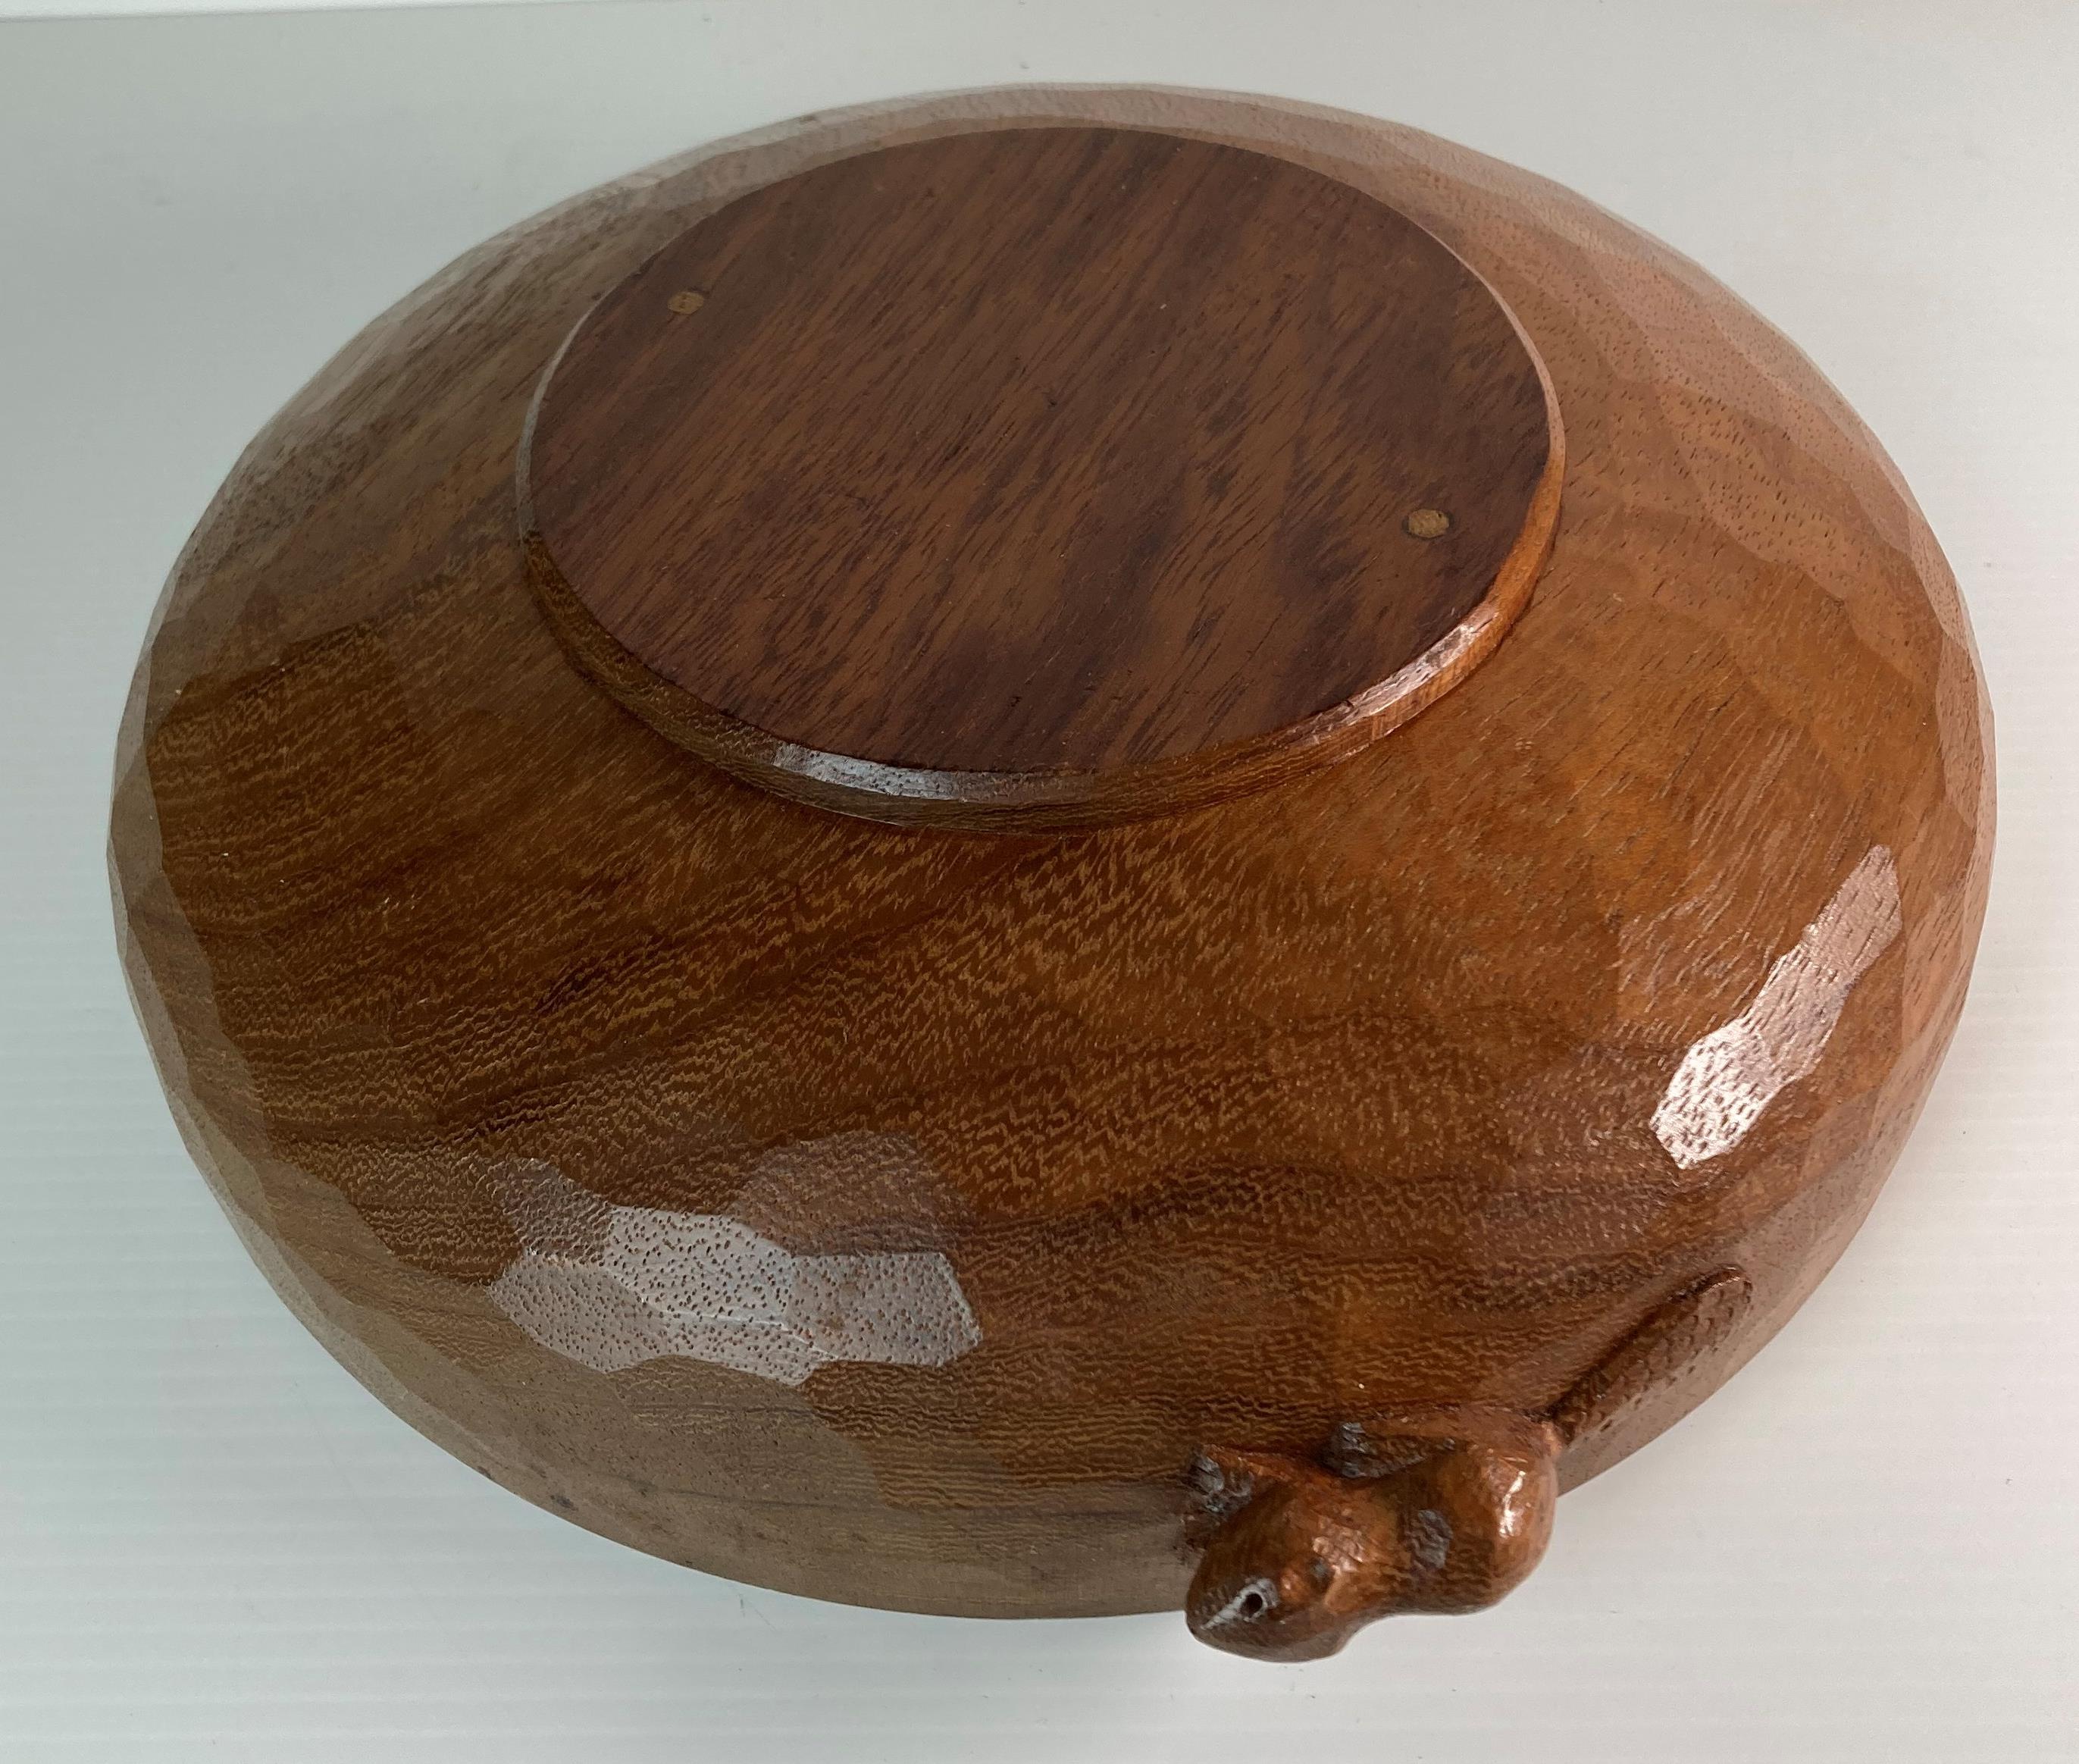 A Beaverman fruit bowl by Colin Almack, - Image 3 of 8